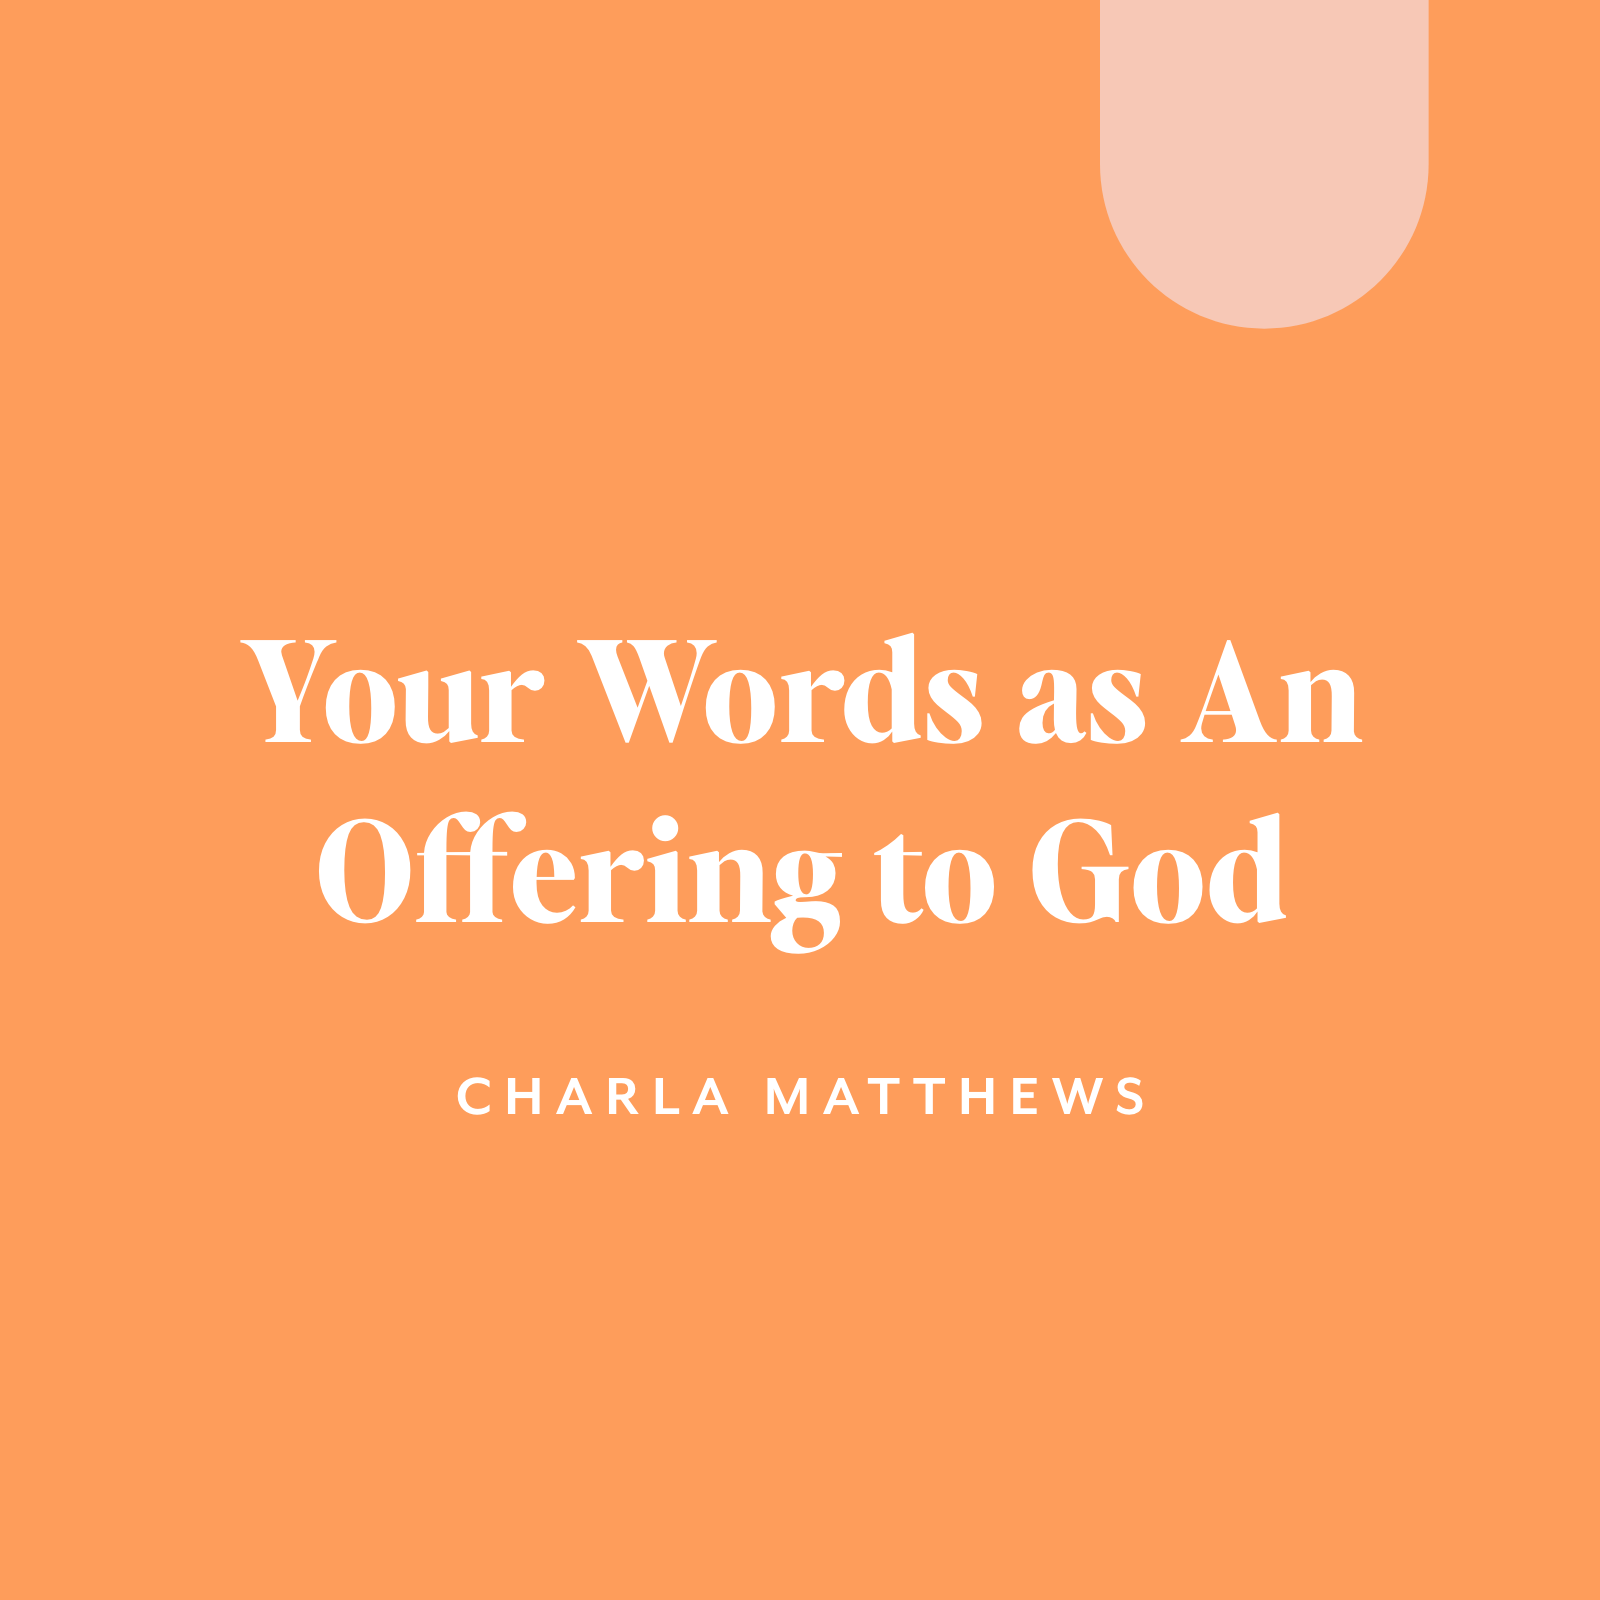 Your Words as An Offering to God